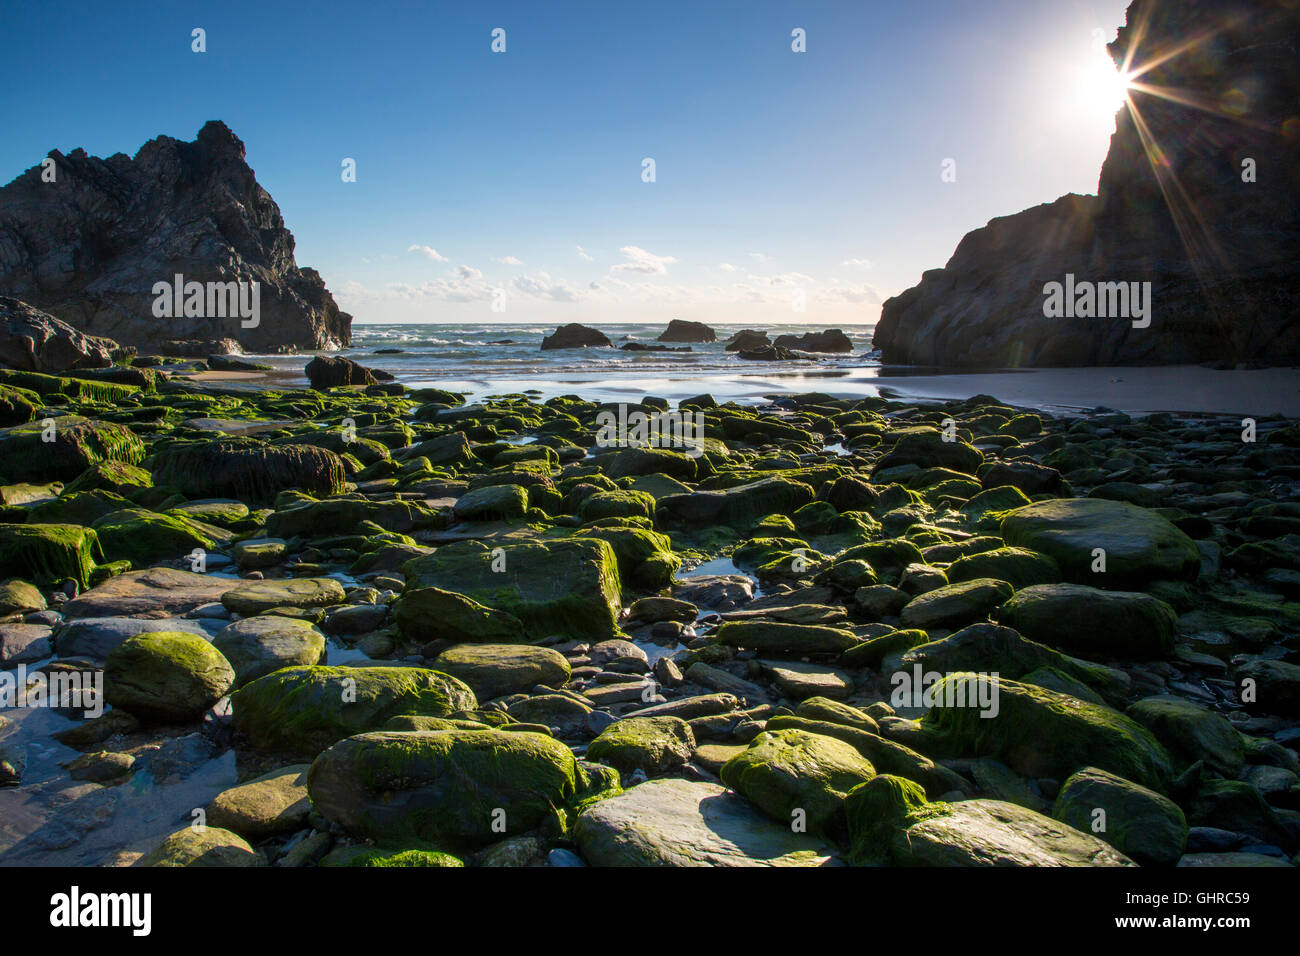 Sea stacks and rocky beach at the Bedruthan Steps along the coast of Cornwall, England Stock Photo